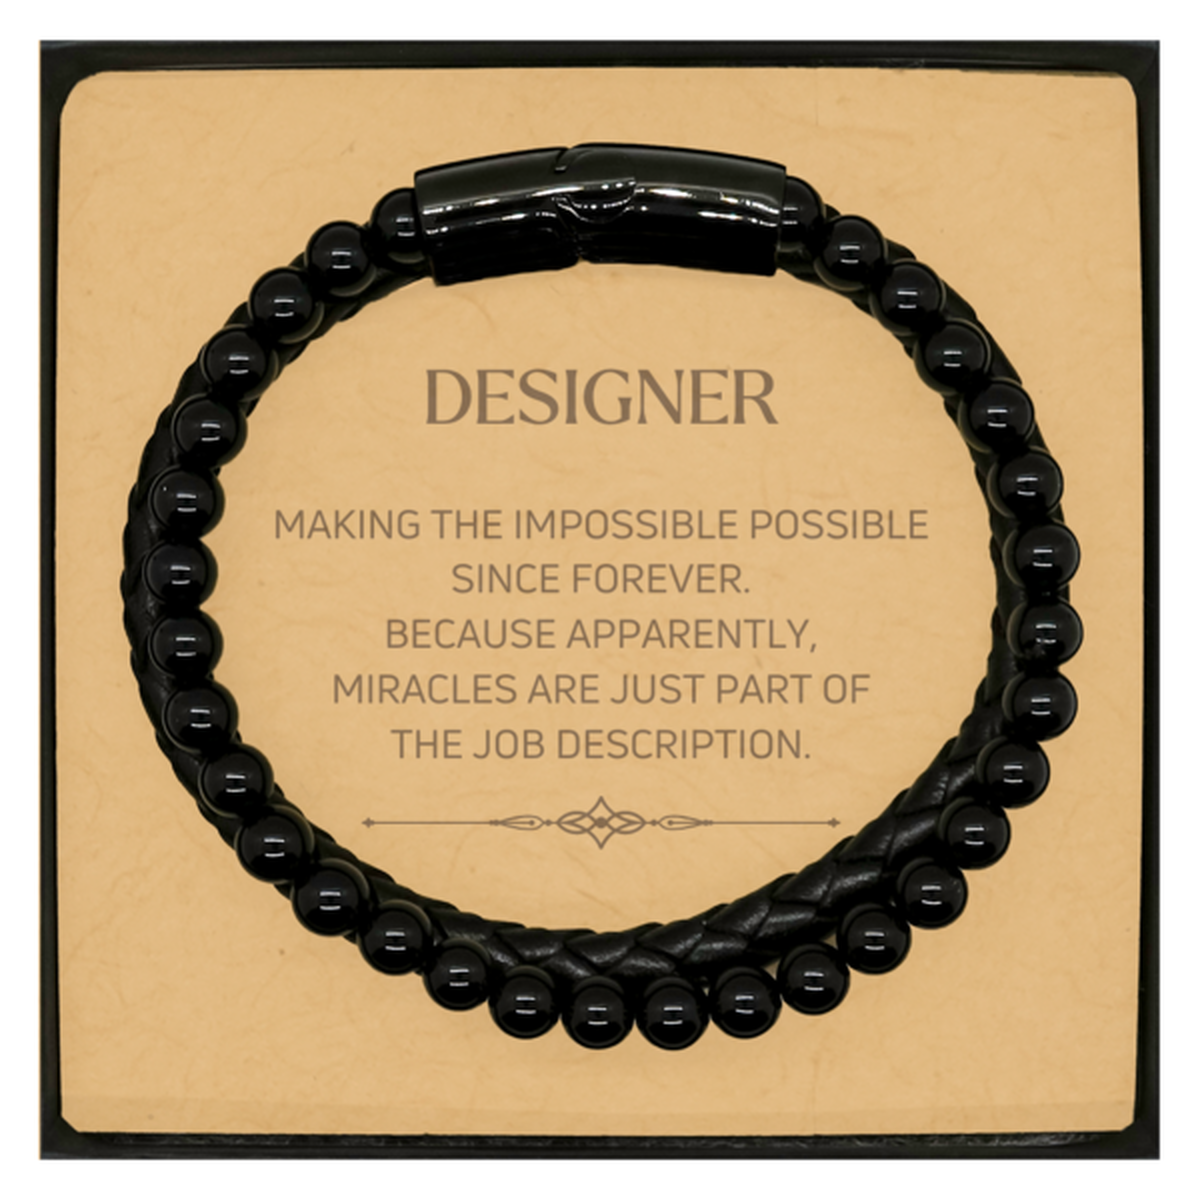 Funny Designer Gifts, Miracles are just part of the job description, Inspirational Birthday Christmas Stone Leather Bracelets For Designer, Men, Women, Coworkers, Friends, Boss